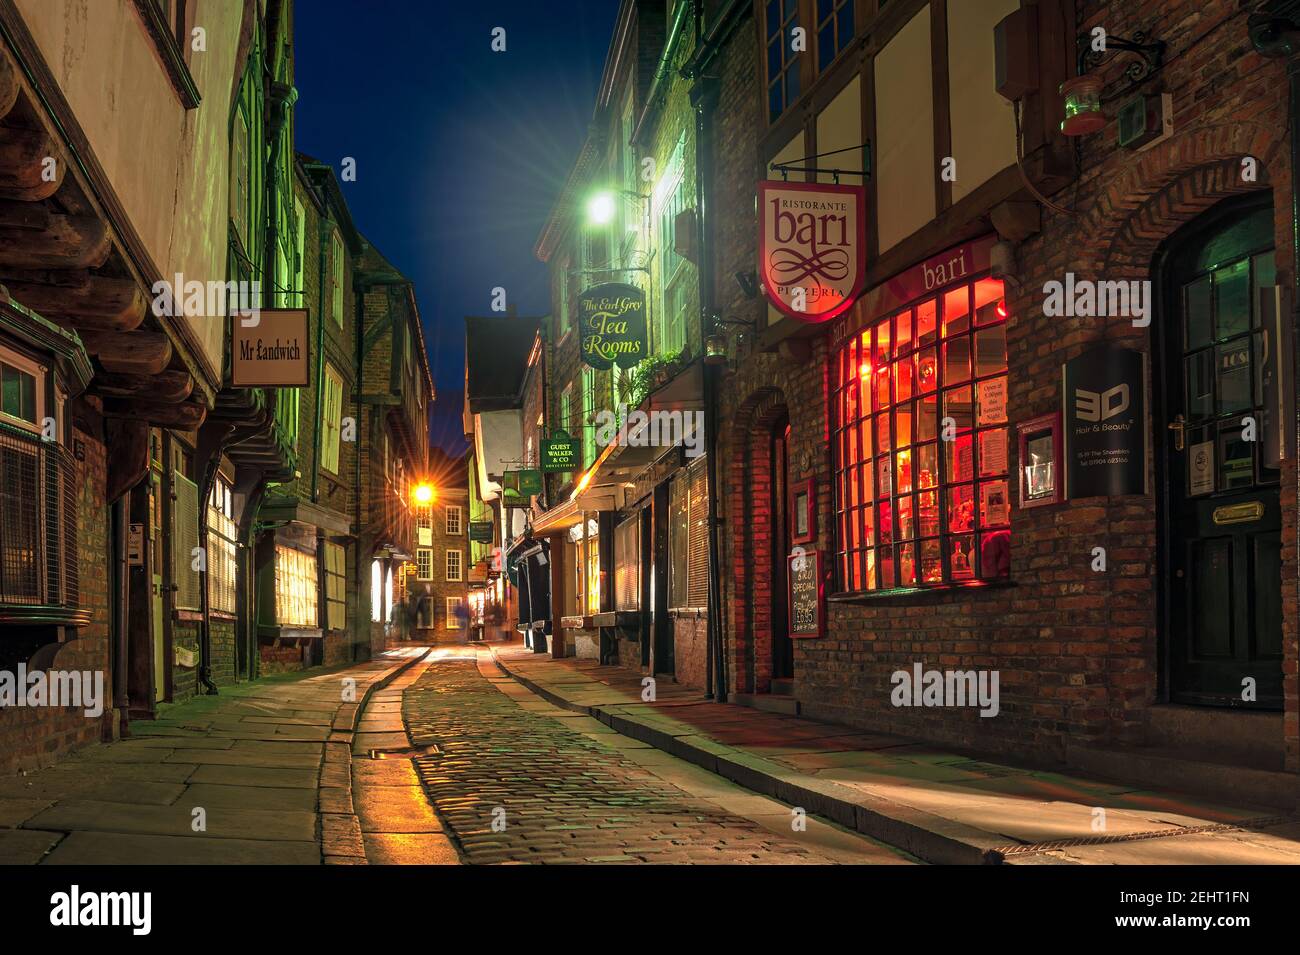 YORK, YORKSHIRE, UK - MARCH 13, 2010:  The famouse street of The Shambles at night Stock Photo